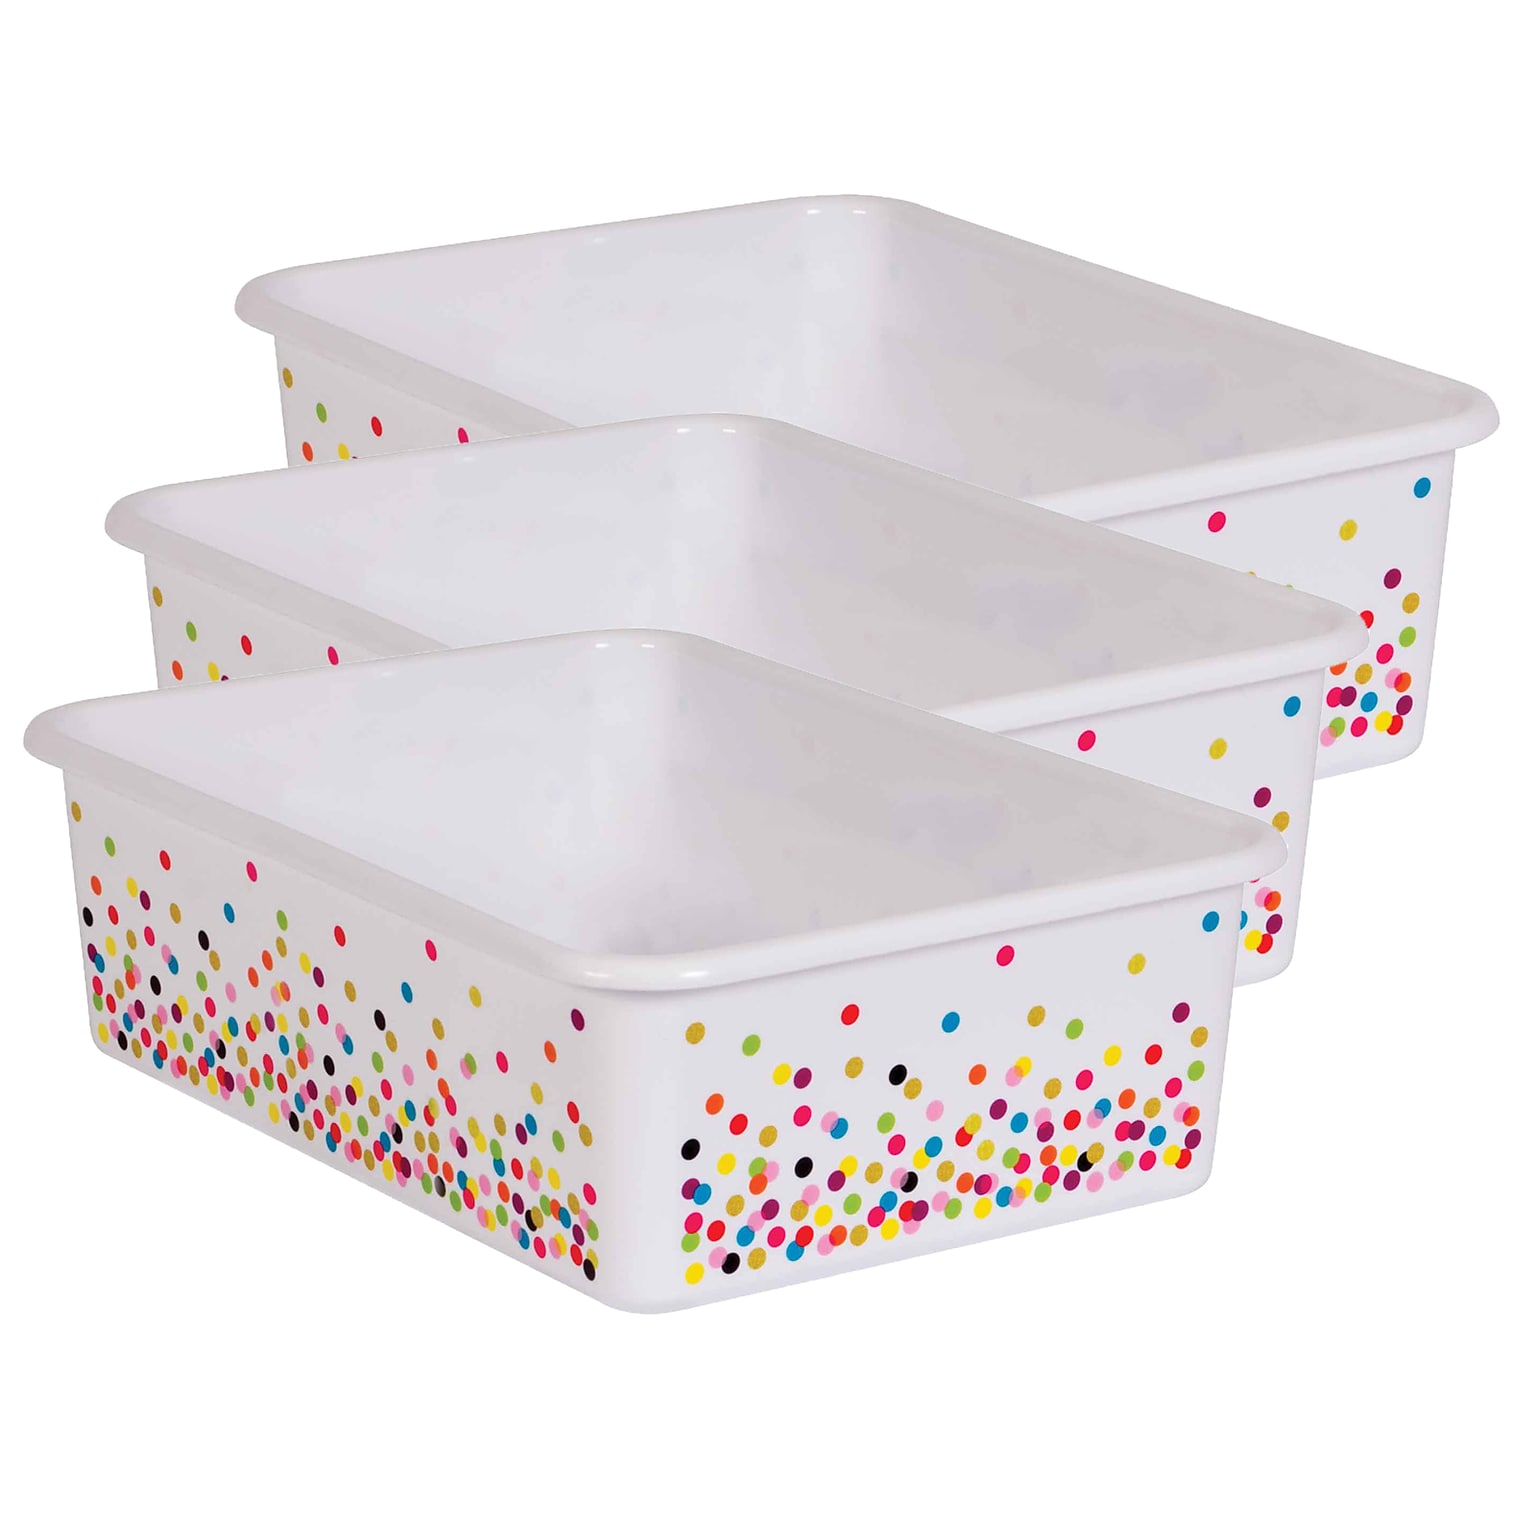 Teacher Created Resources Plastic Large Confetti Storage Bin, 11.5 x 16.25 x 5, Multicolored, Pack of 3 (TCR20895-3)